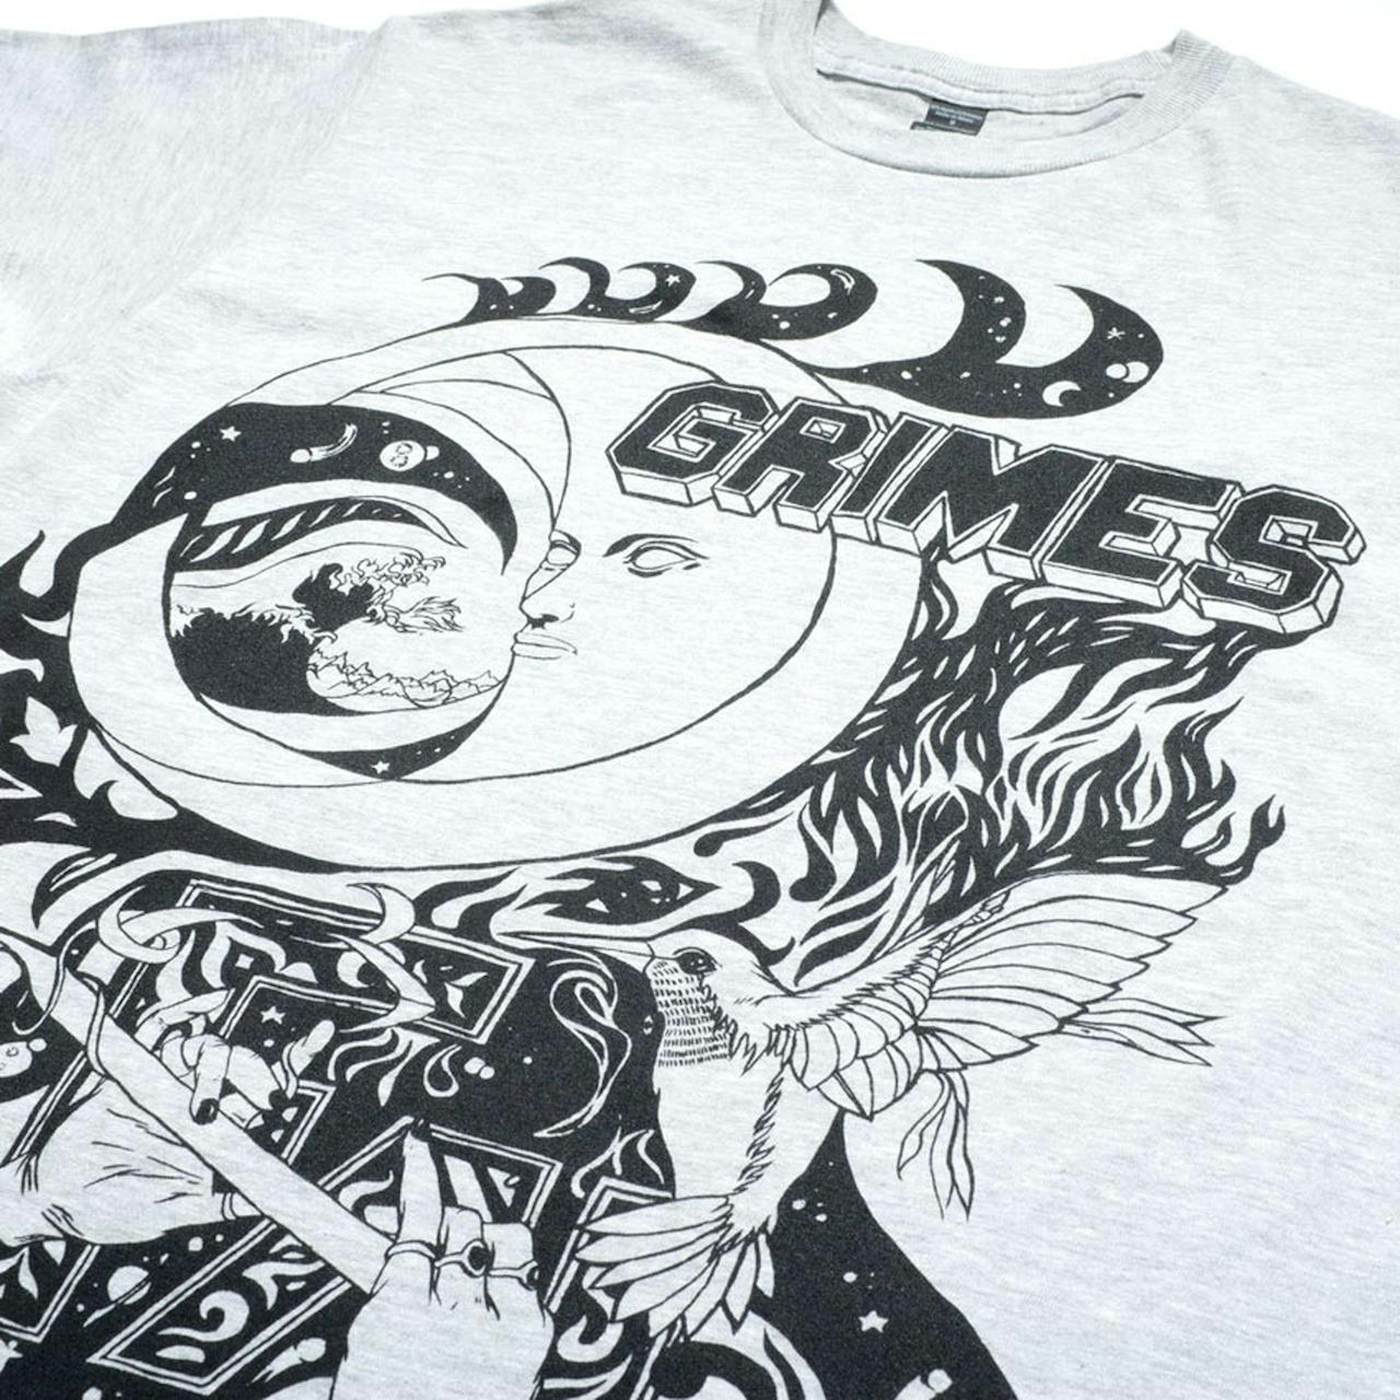 Grimes Player of Games logo T-shirt, hoodie, sweater, longsleeve and V-neck  T-shirt